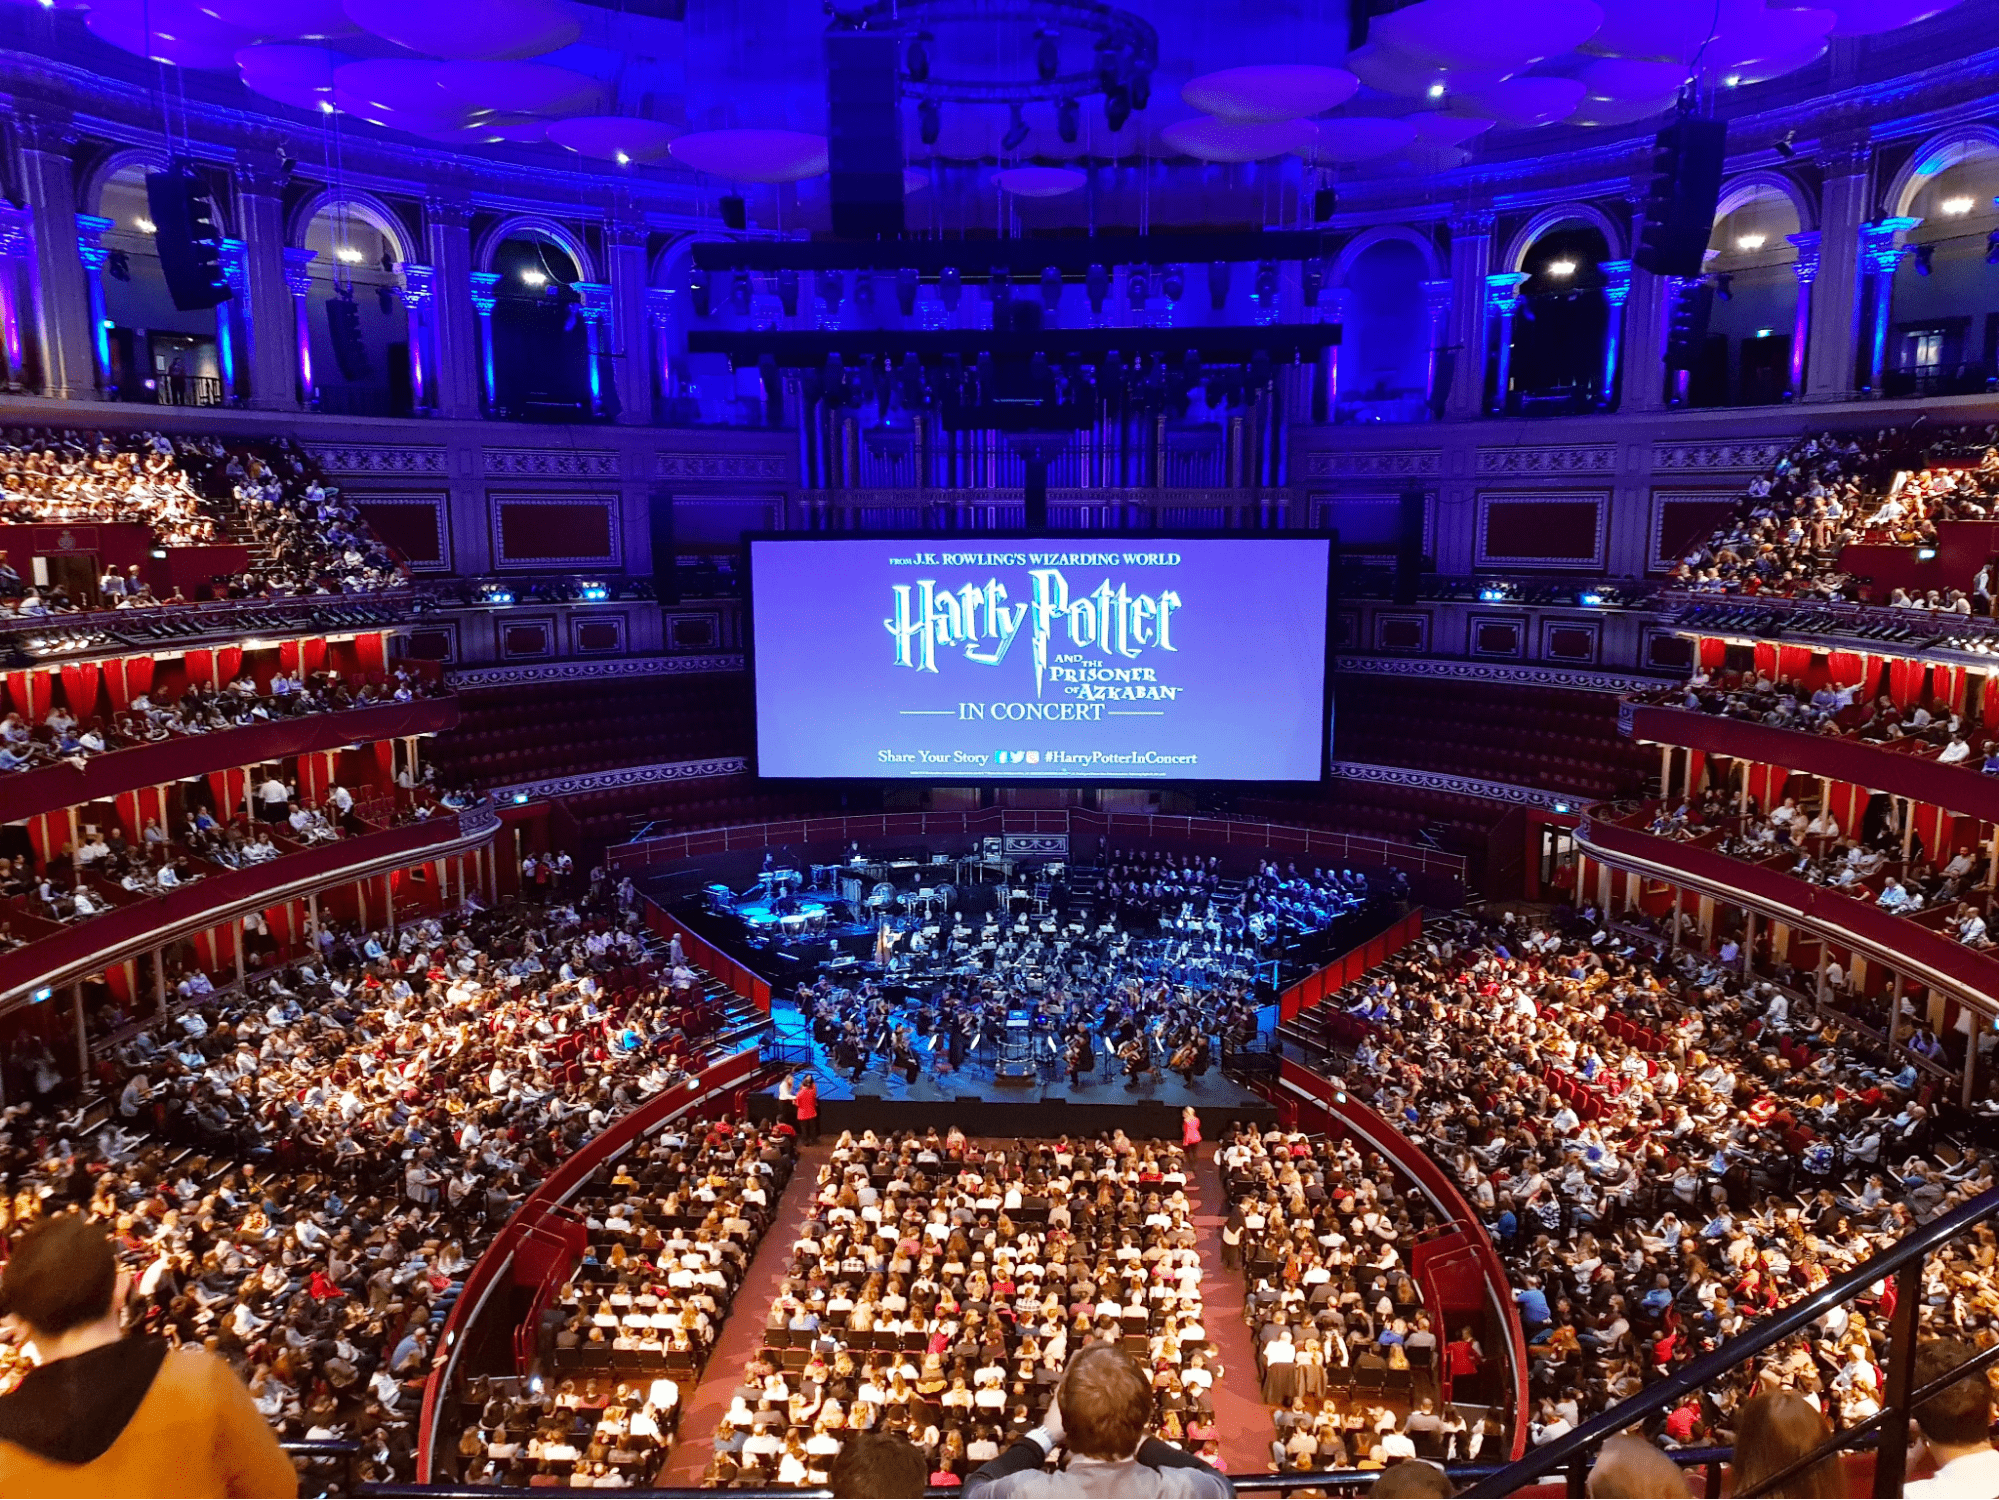 harry potter concert singapore -Harry Potter and the Order of the Phoenix in Concert